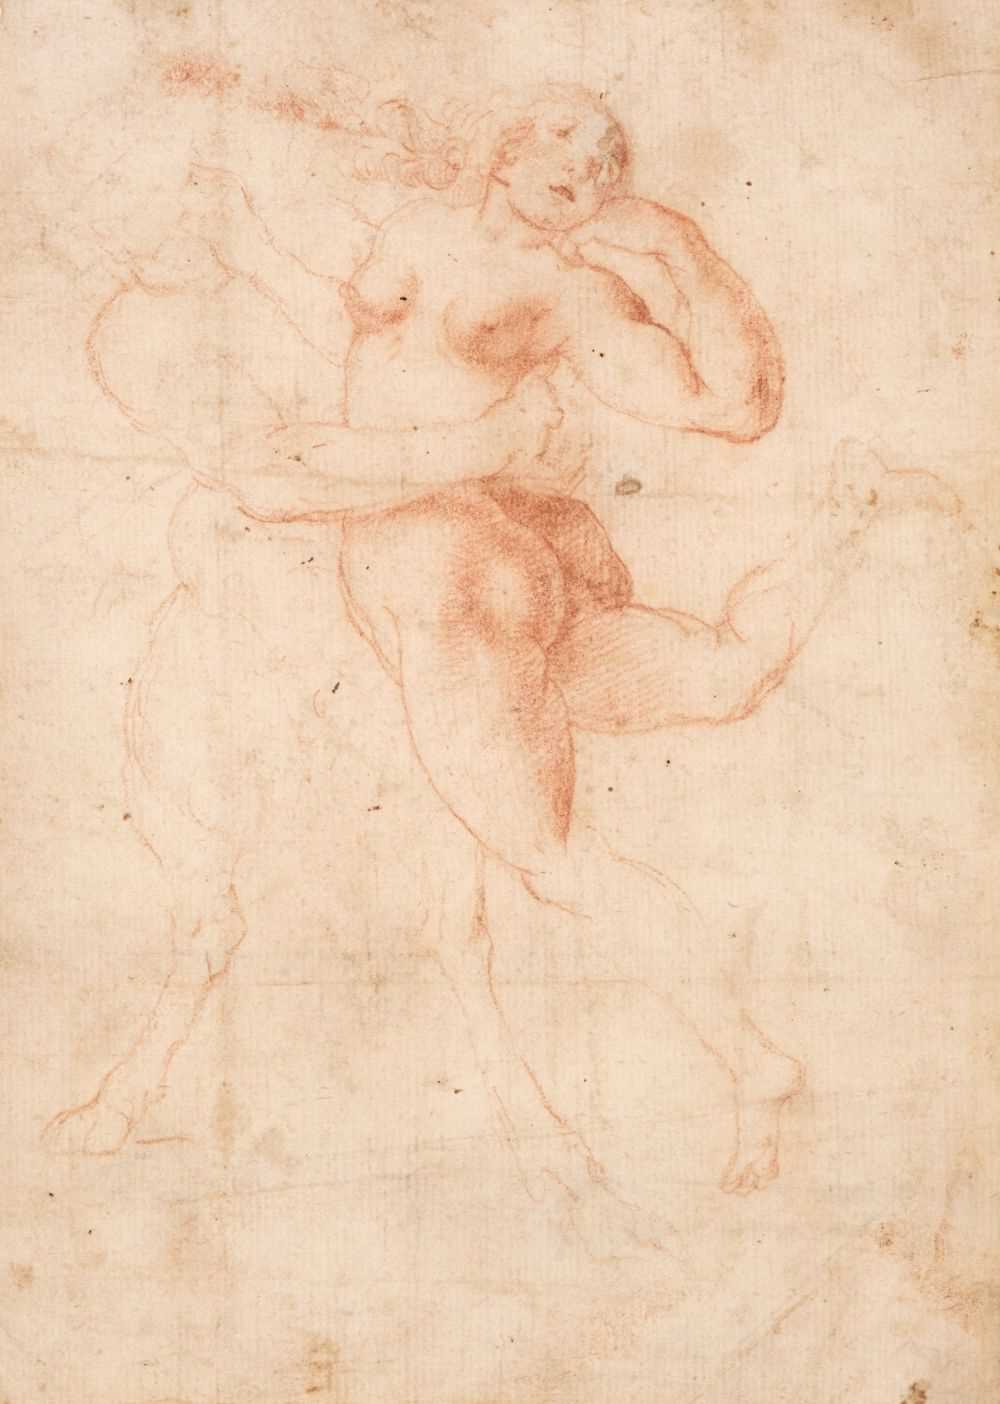 Lot 42 - Florentine School, Early 17th Century. A Satyr abducting a Nymph, sanguine crayon on fine laid paper